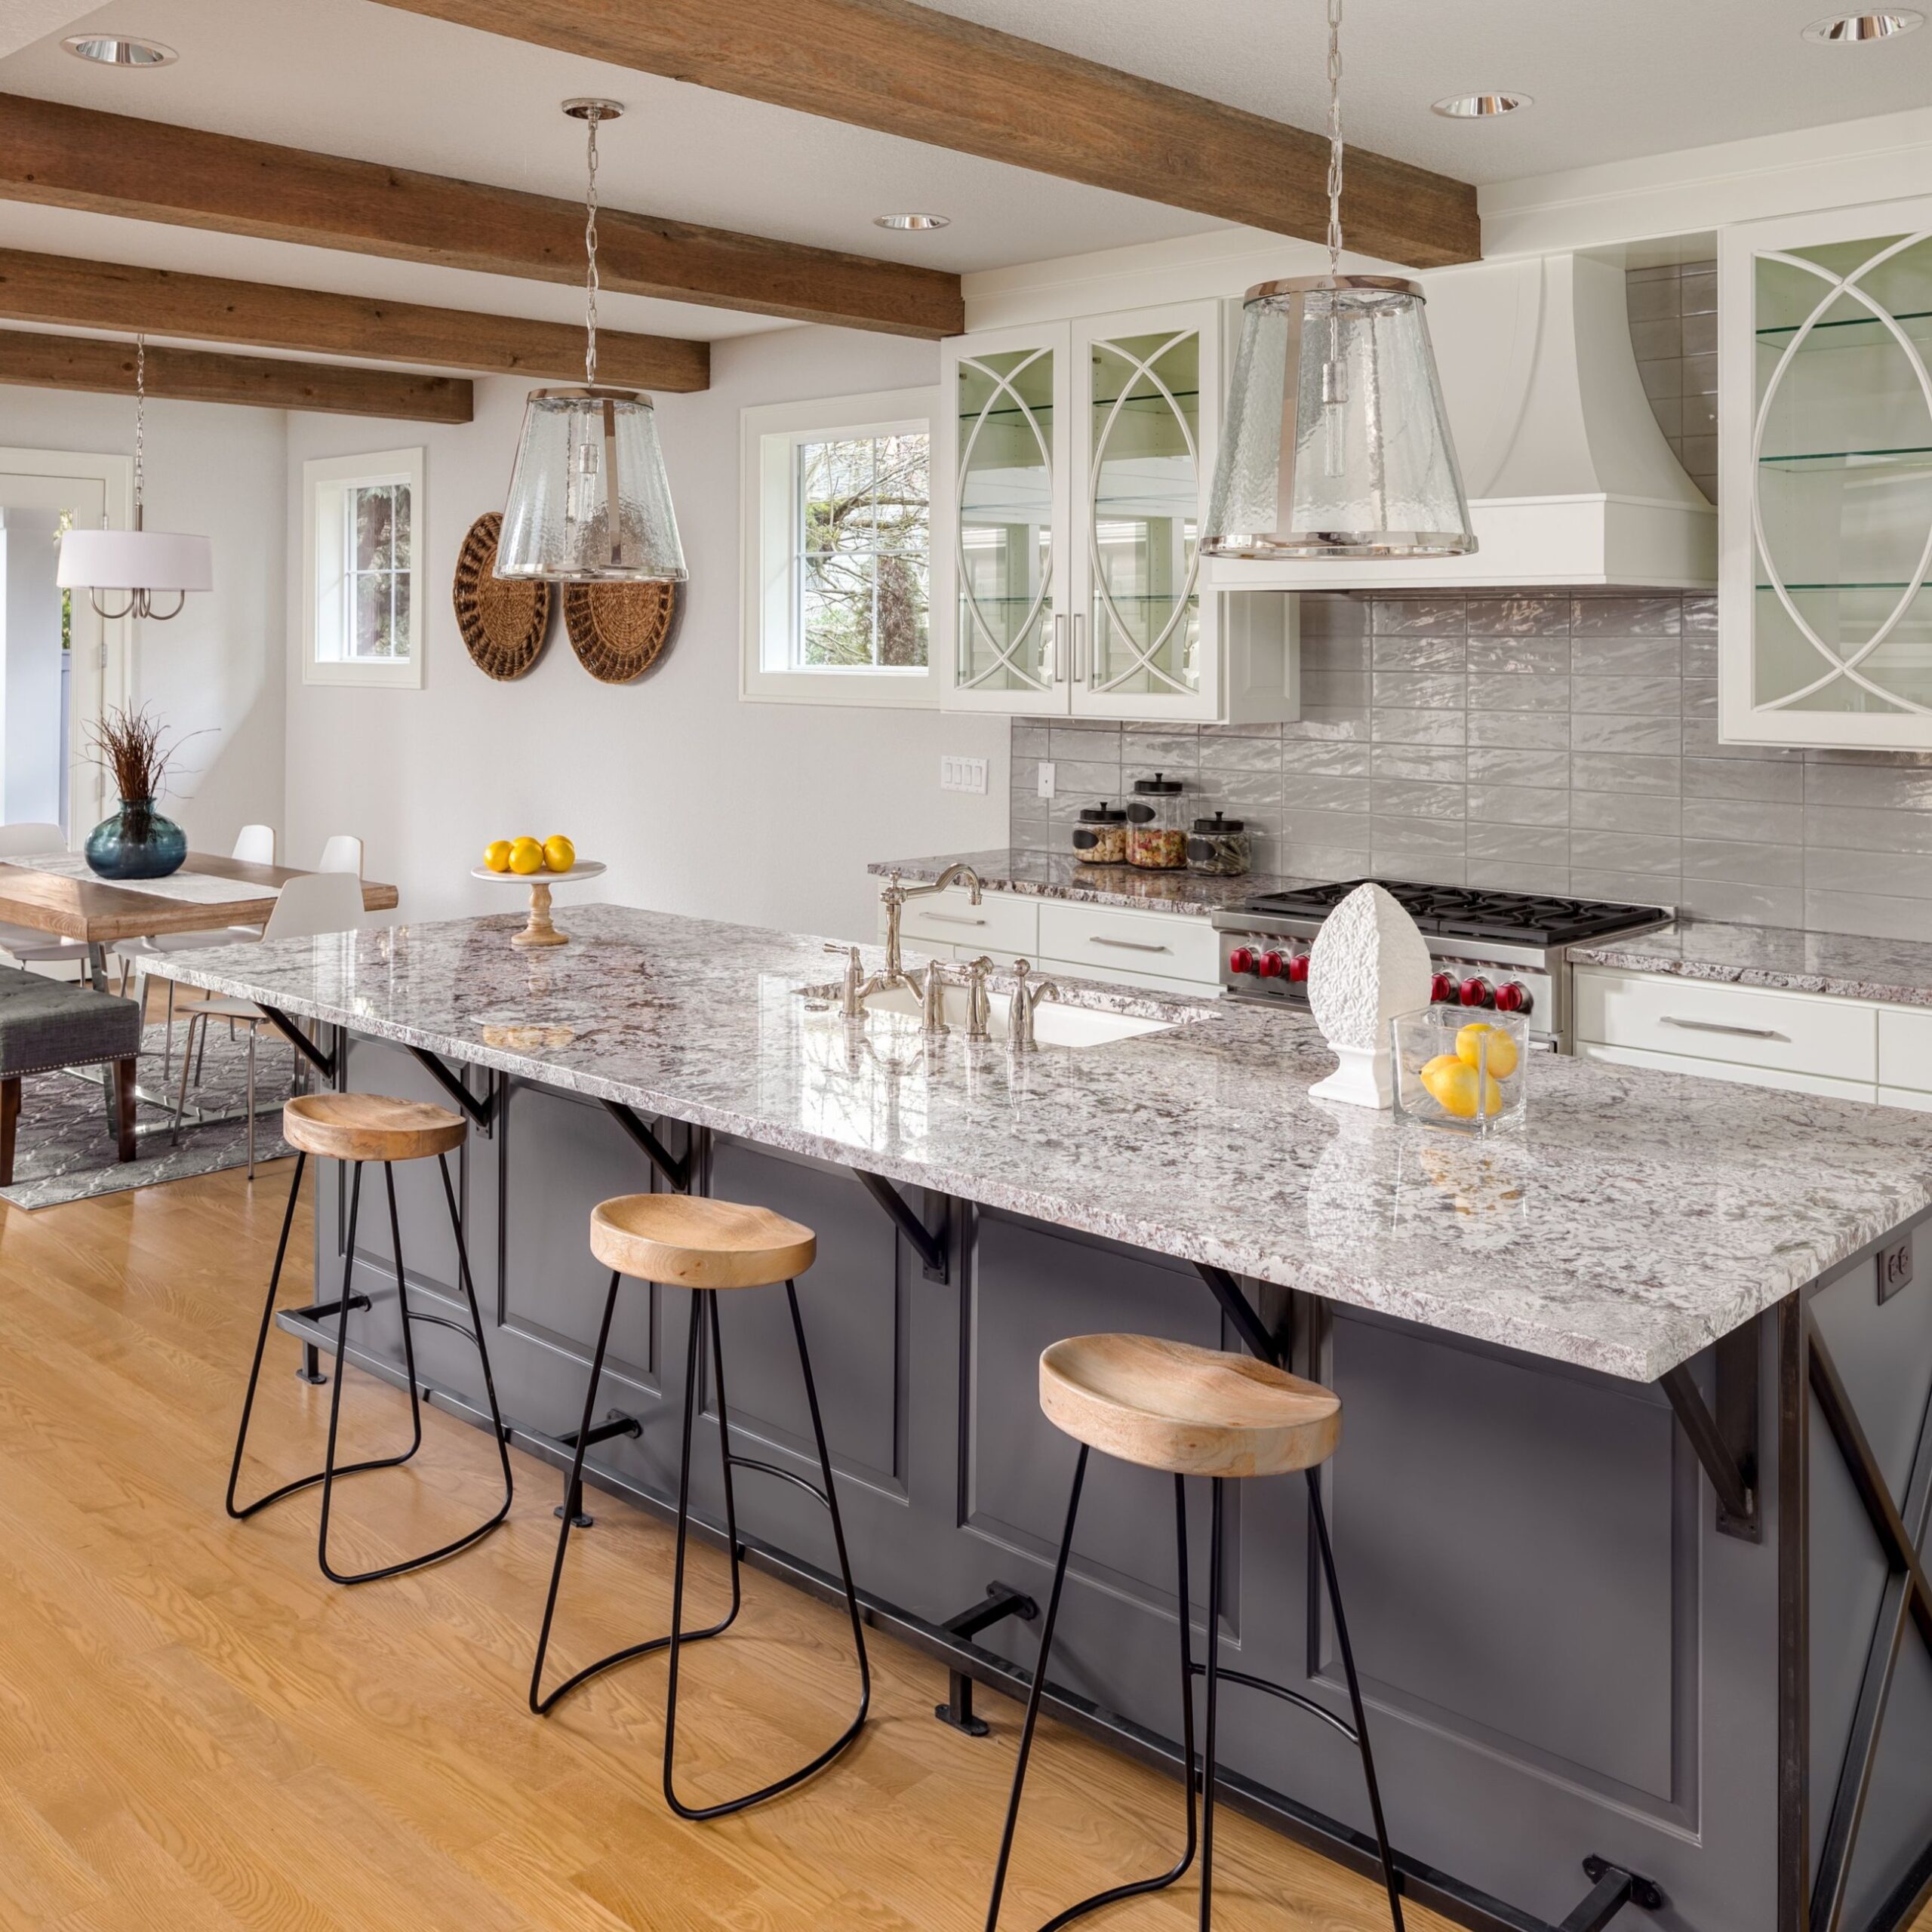 5 Granite Countertop Color Options for Your Kitchen - what color granite looks best with white cabinets?